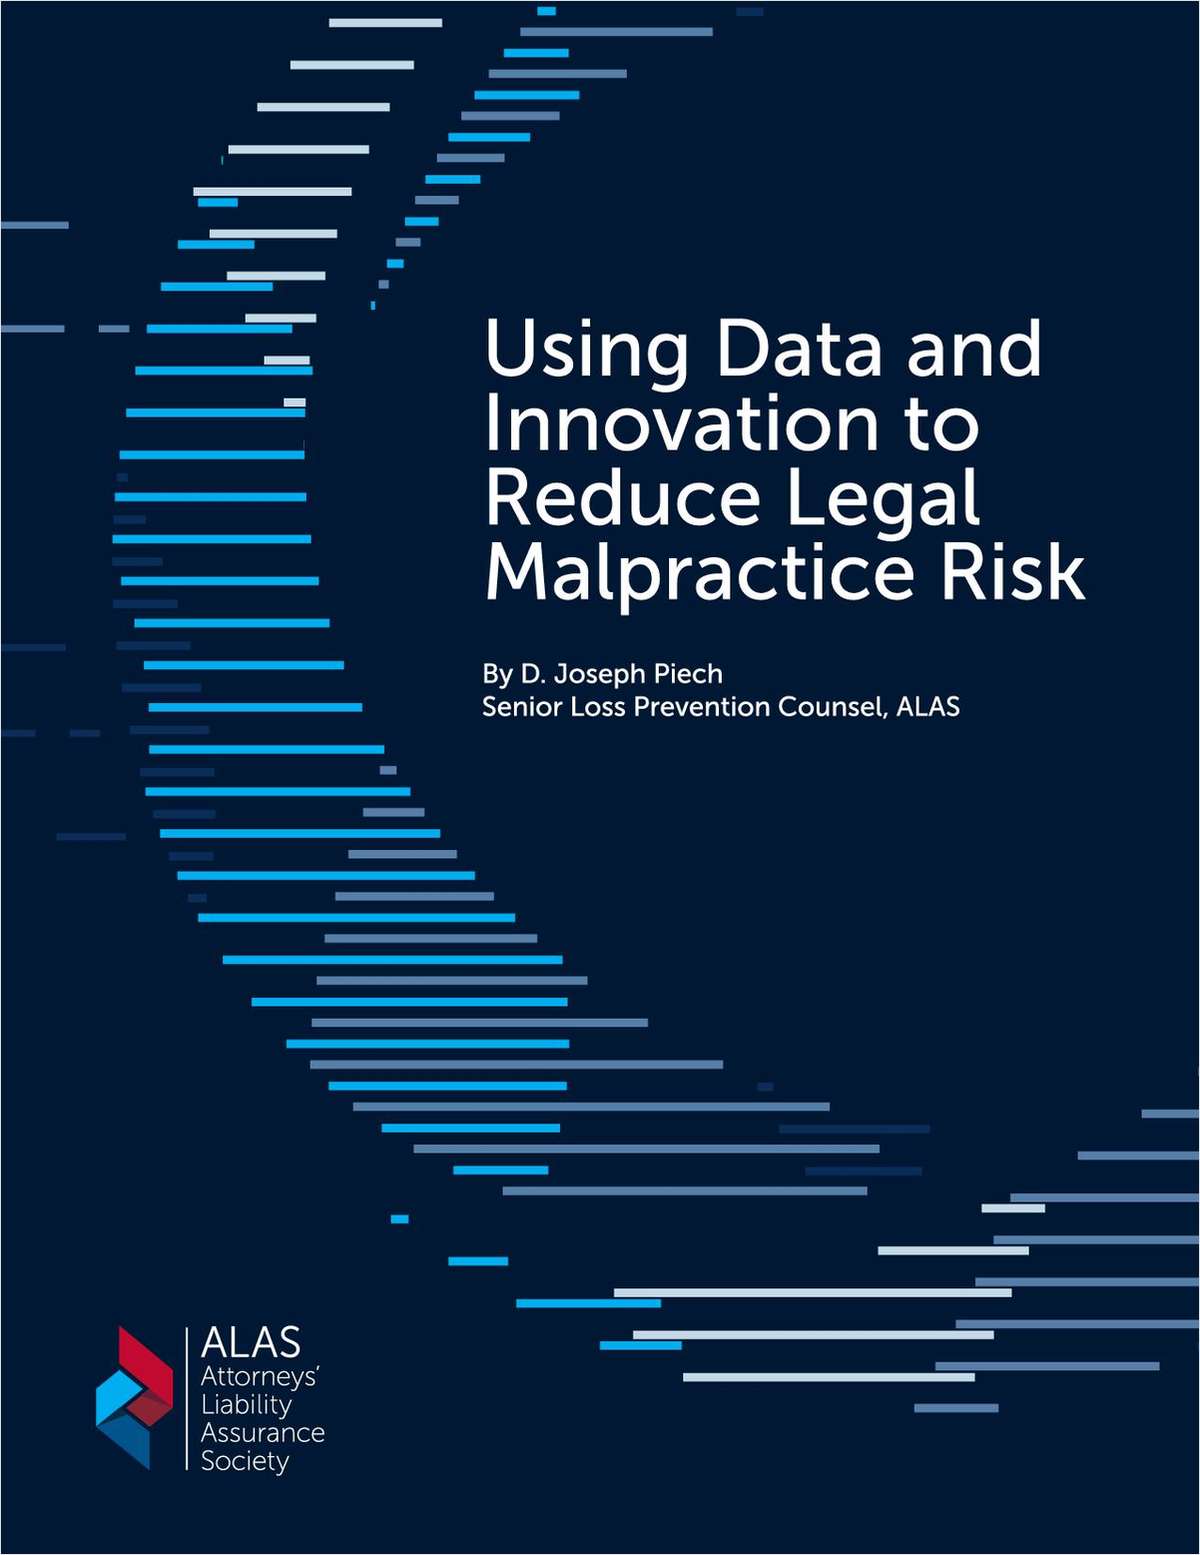 Innovation that leverages existing law firm data can significantly reduce malpractice risk and exposure. Download this white paper and explore multiple approaches to using data to address key malpractice risk areas, and words of caution around using generative AI tools like ChatGPT.